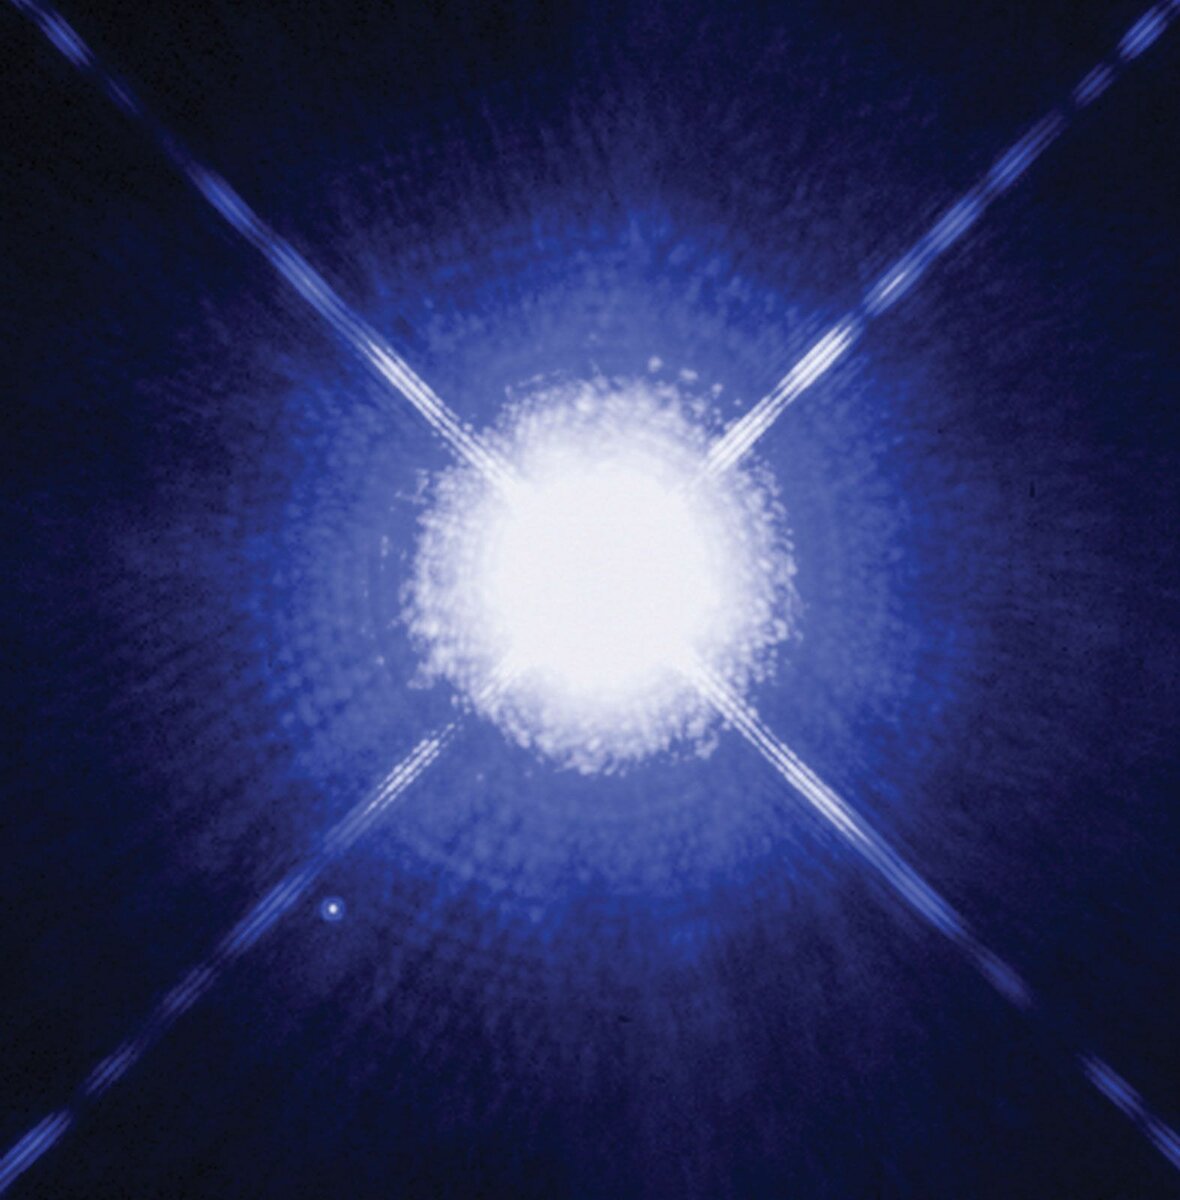 This is how the Hubble Space Telescope "sees" Sirius.